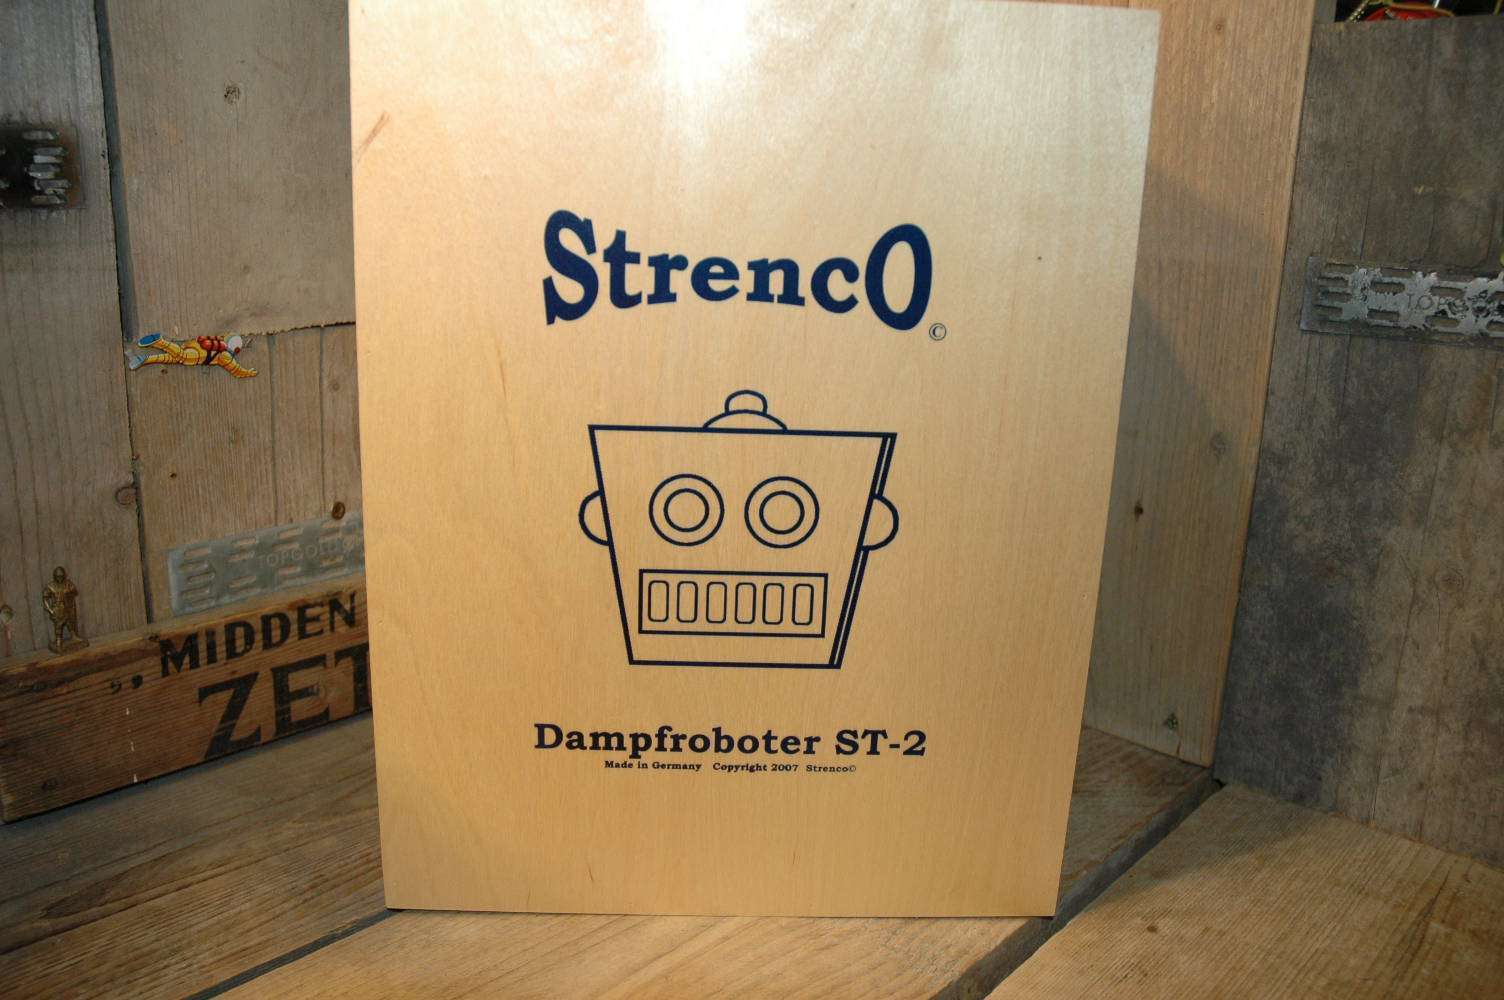 Strenco - DampfRoboter ST-2 Steambot